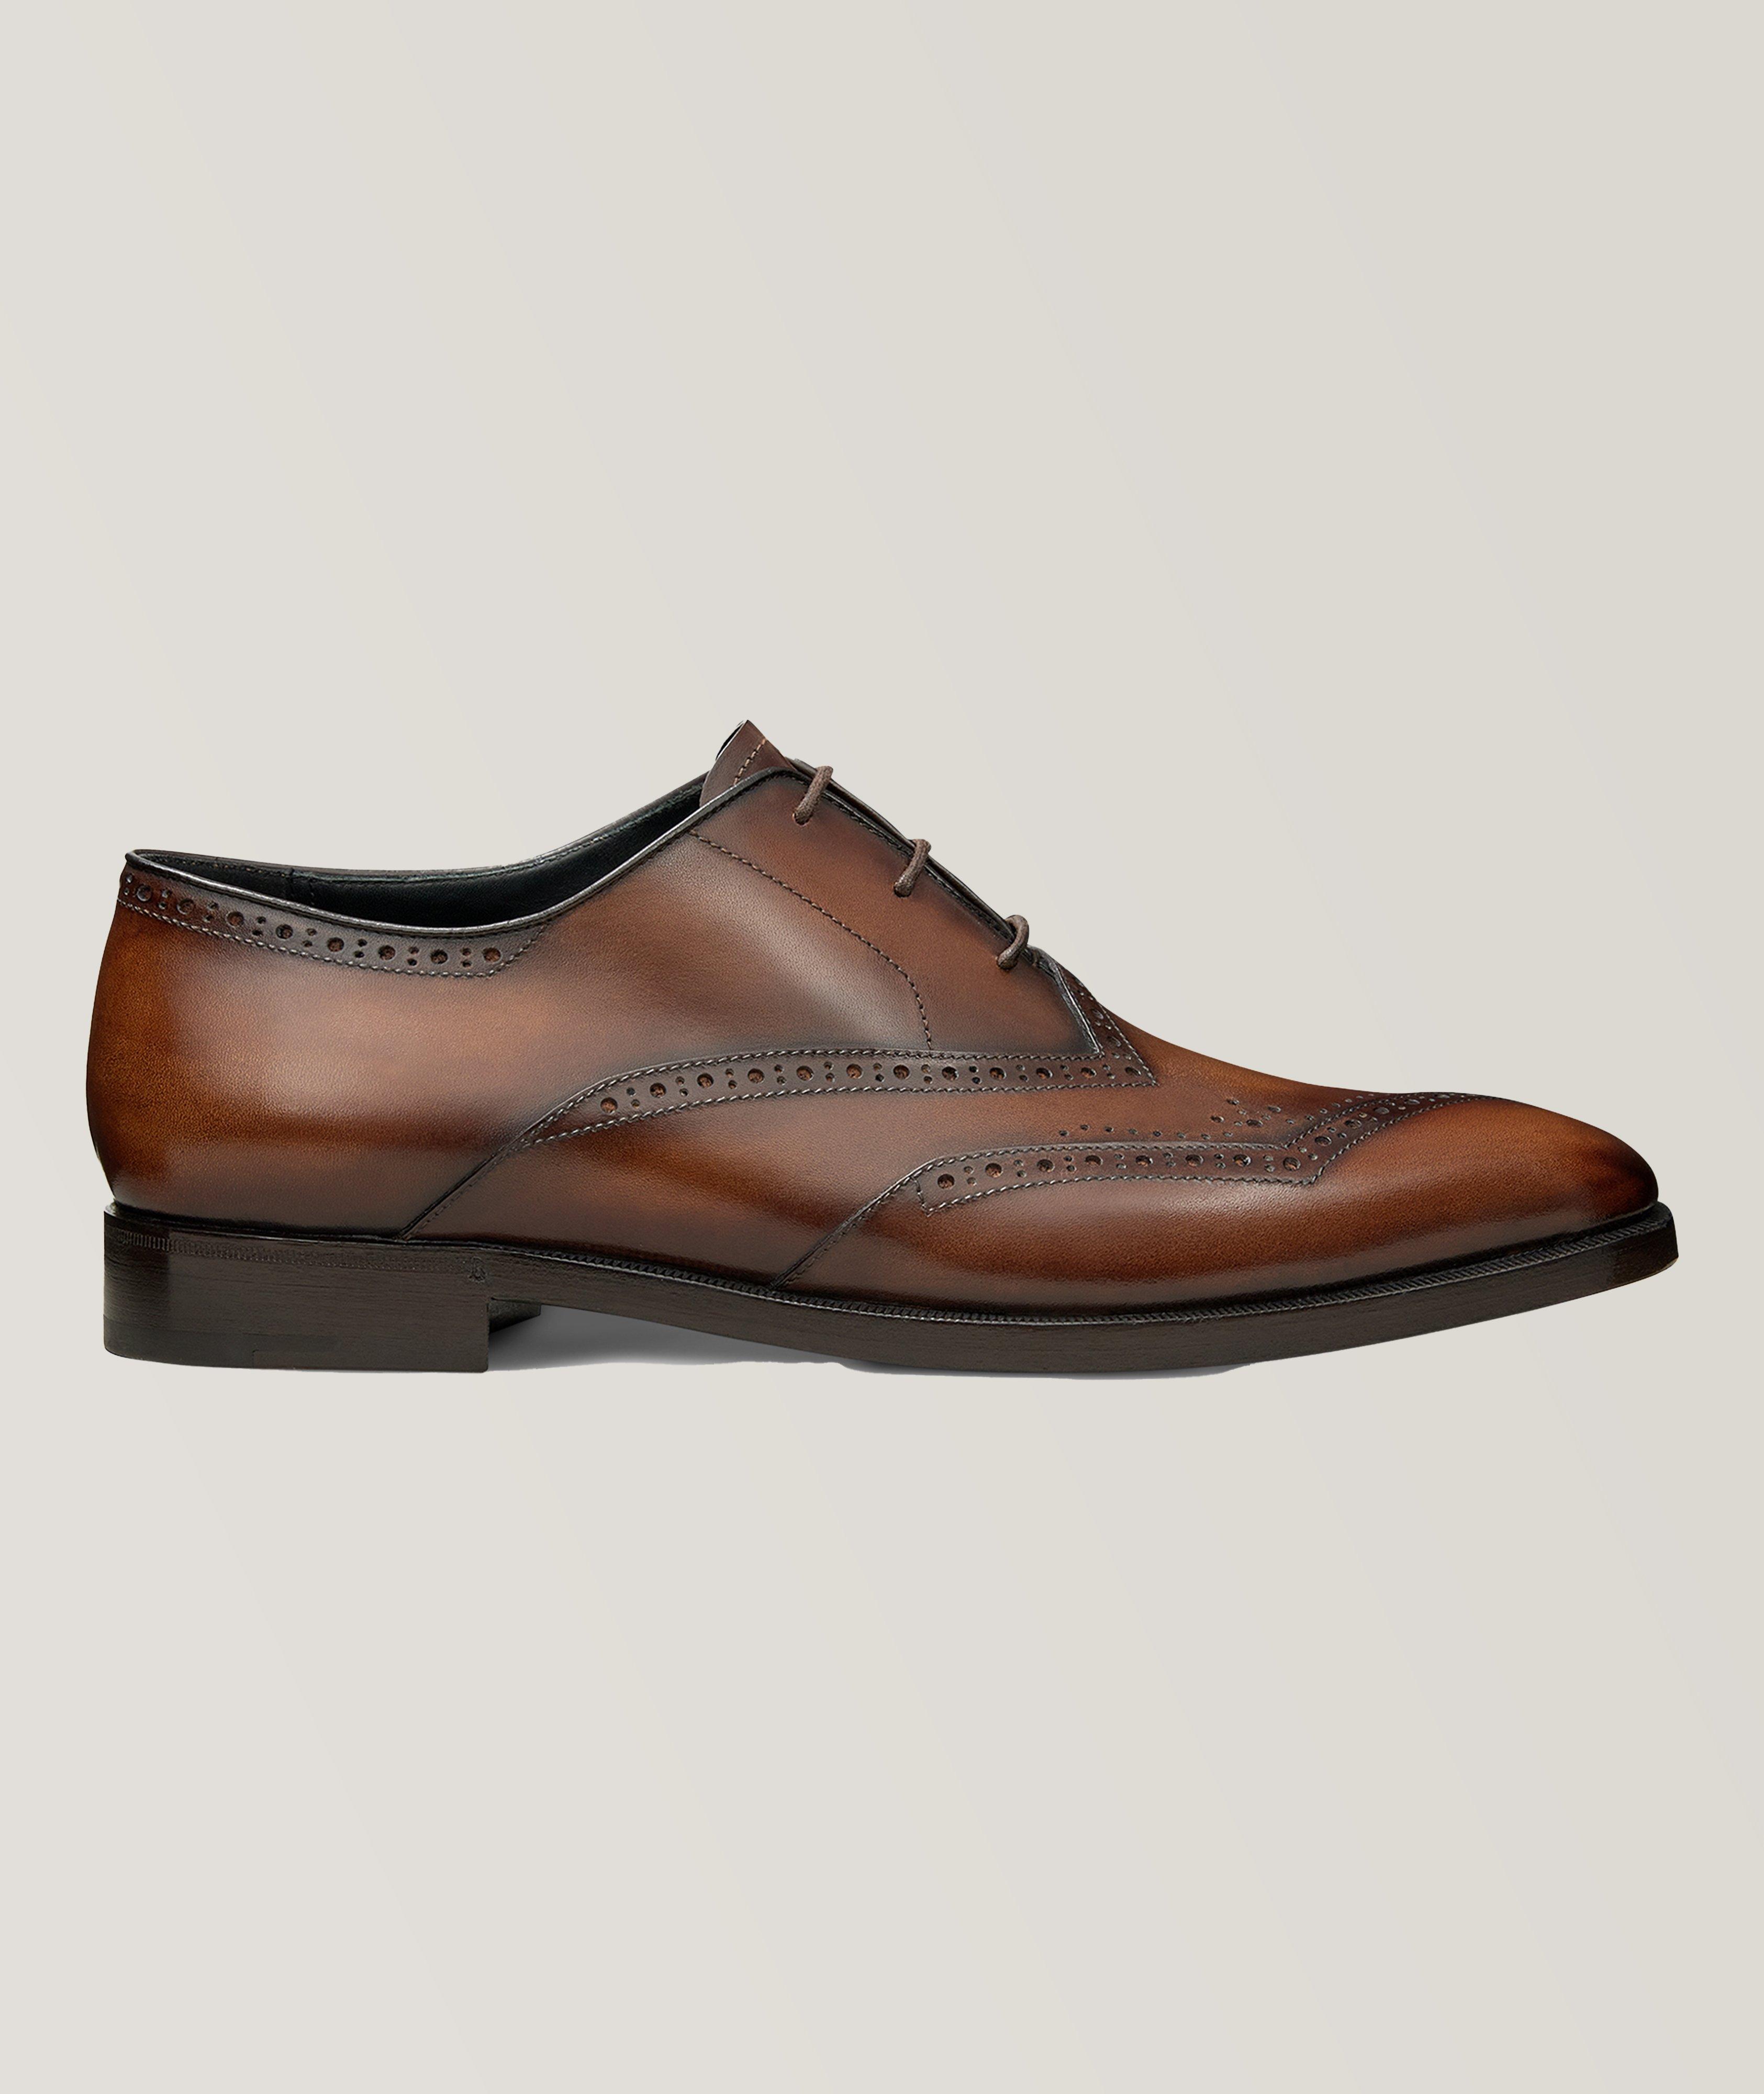 Asymmetric Broque Leather Oxford  image 0